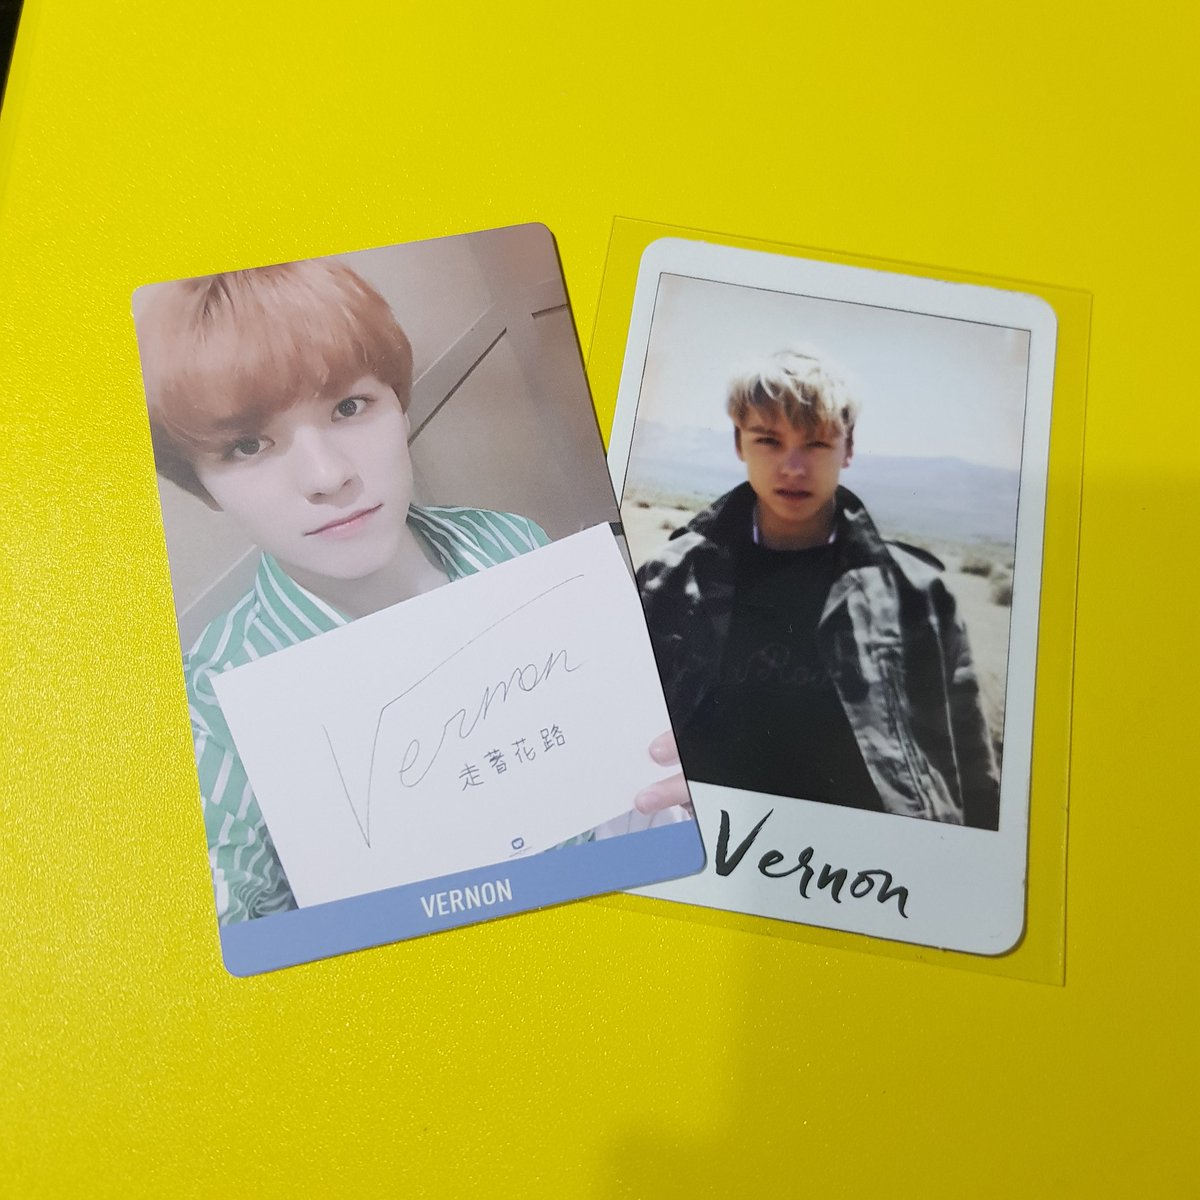 Thank you for these  @__chae_!!! Cant wait for the tingi pcs soon 